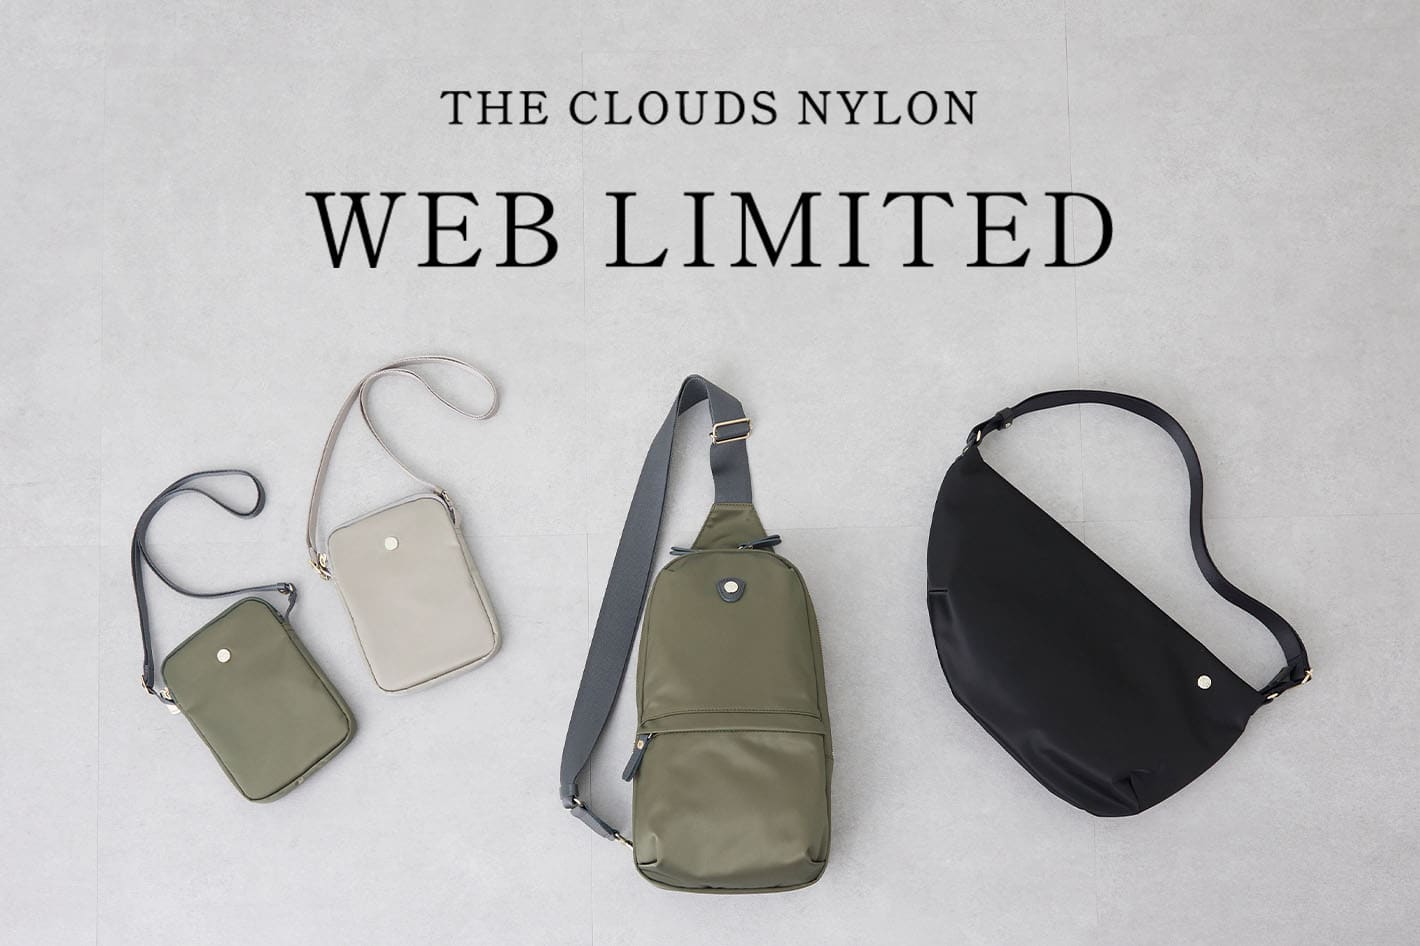 russet ◆New Arrival◆WEB限定の人気アイテムに「THE CLOUDS NYLON」タイプが登場！